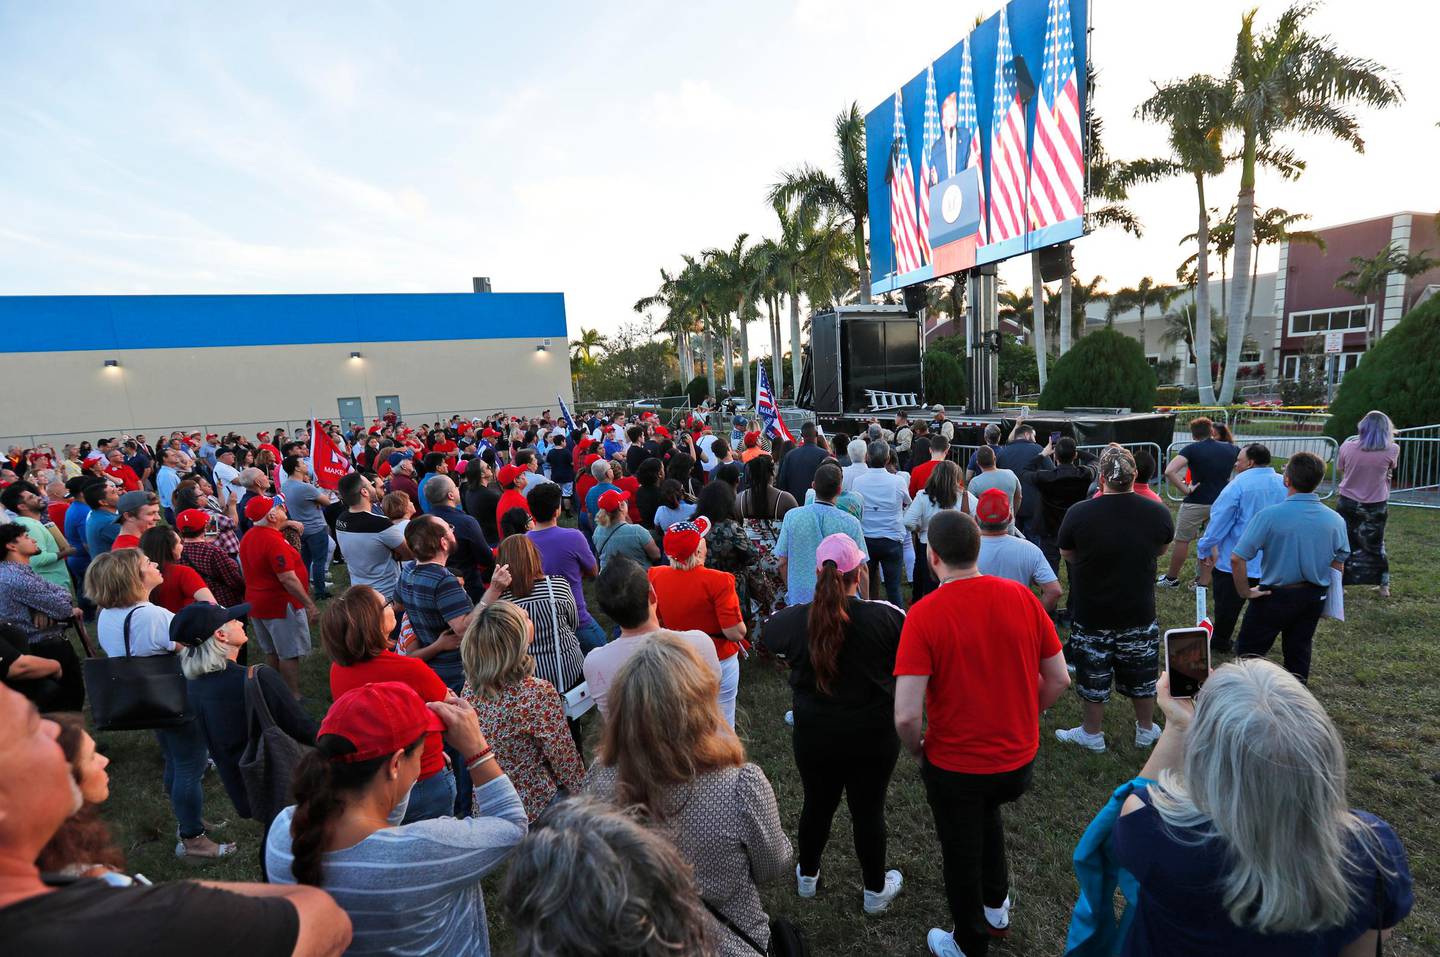 Attendees watch President Donald Trump on a large screen in an overflow area outside the King Jesus International Ministry, during a rally with the president, Friday, Jan. 3, 2020, in Miami. (AP Photo/Wilfredo Lee)